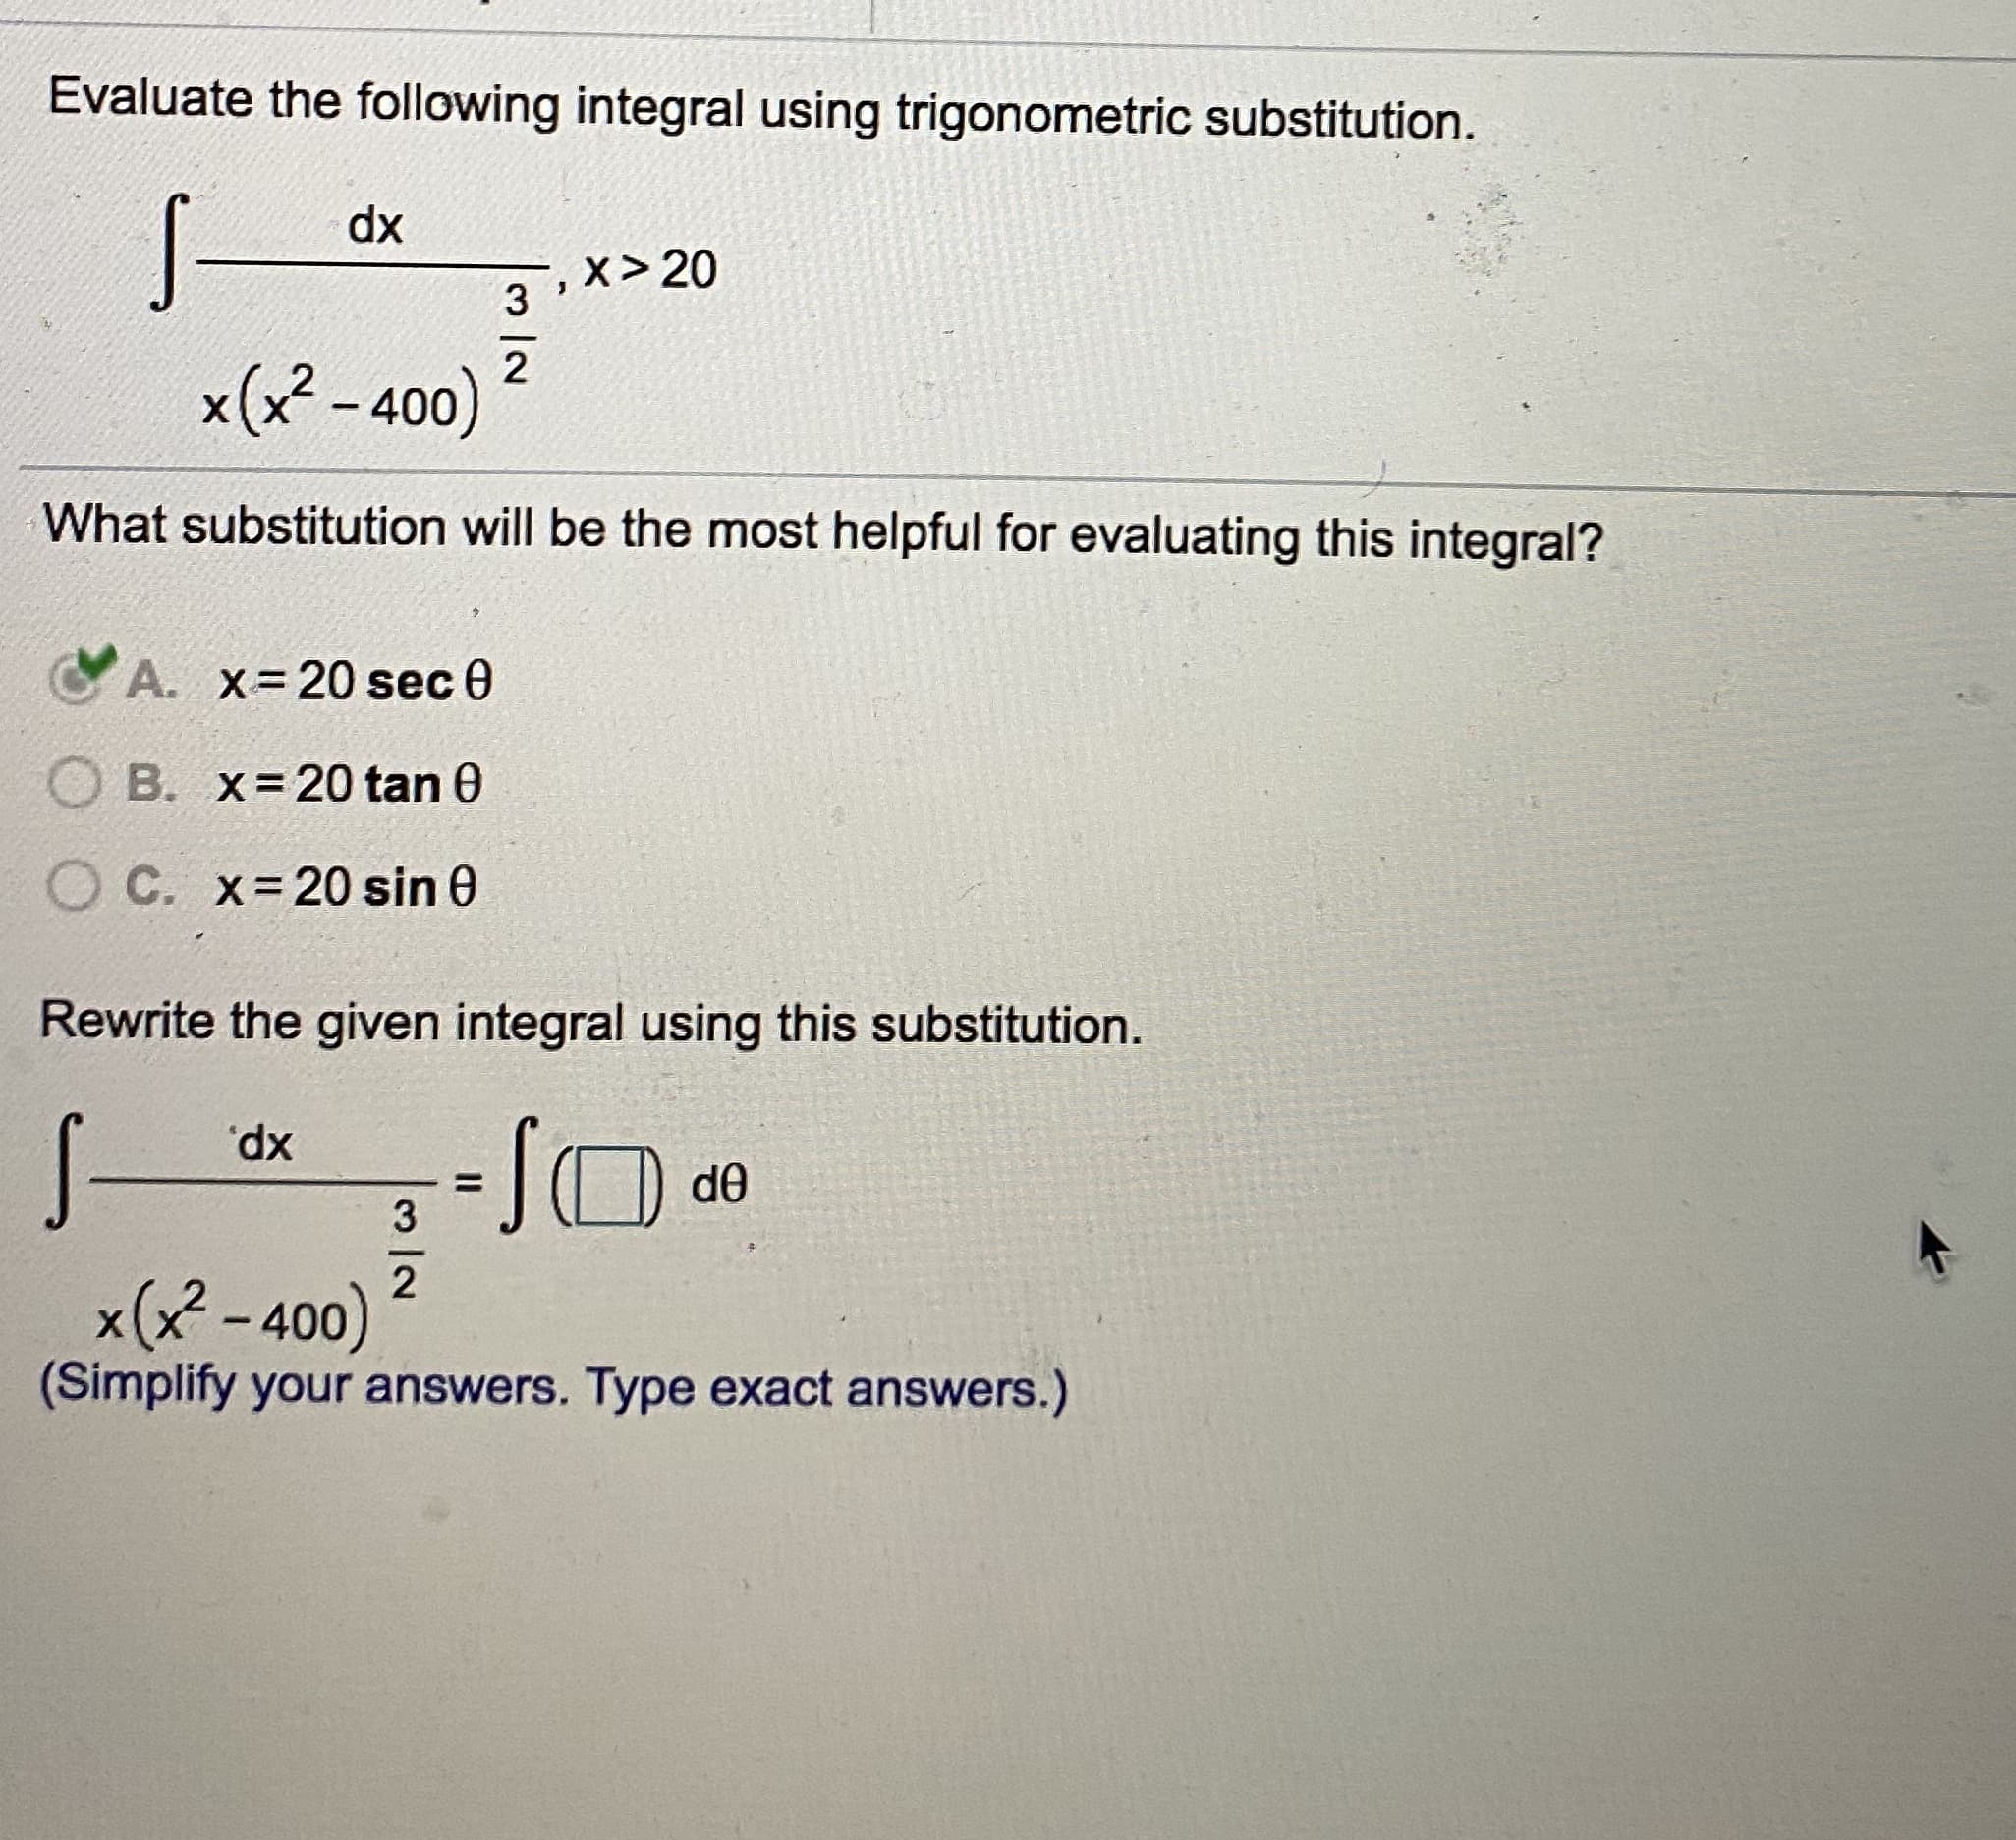 Evaluate the following integral using trigonometric substitution.
dx
x> 20
3
x(x? - 400)
What substitution will be the most helpful for evaluating this integral?
A. x-20 sec 0
O B. x=20 tan 0
O C. x=20 sin 0
Rewrite the given integral using this substitution.
Xp,
d0
x(x - 400)
(Simplify your answers. Type exact answers.)
